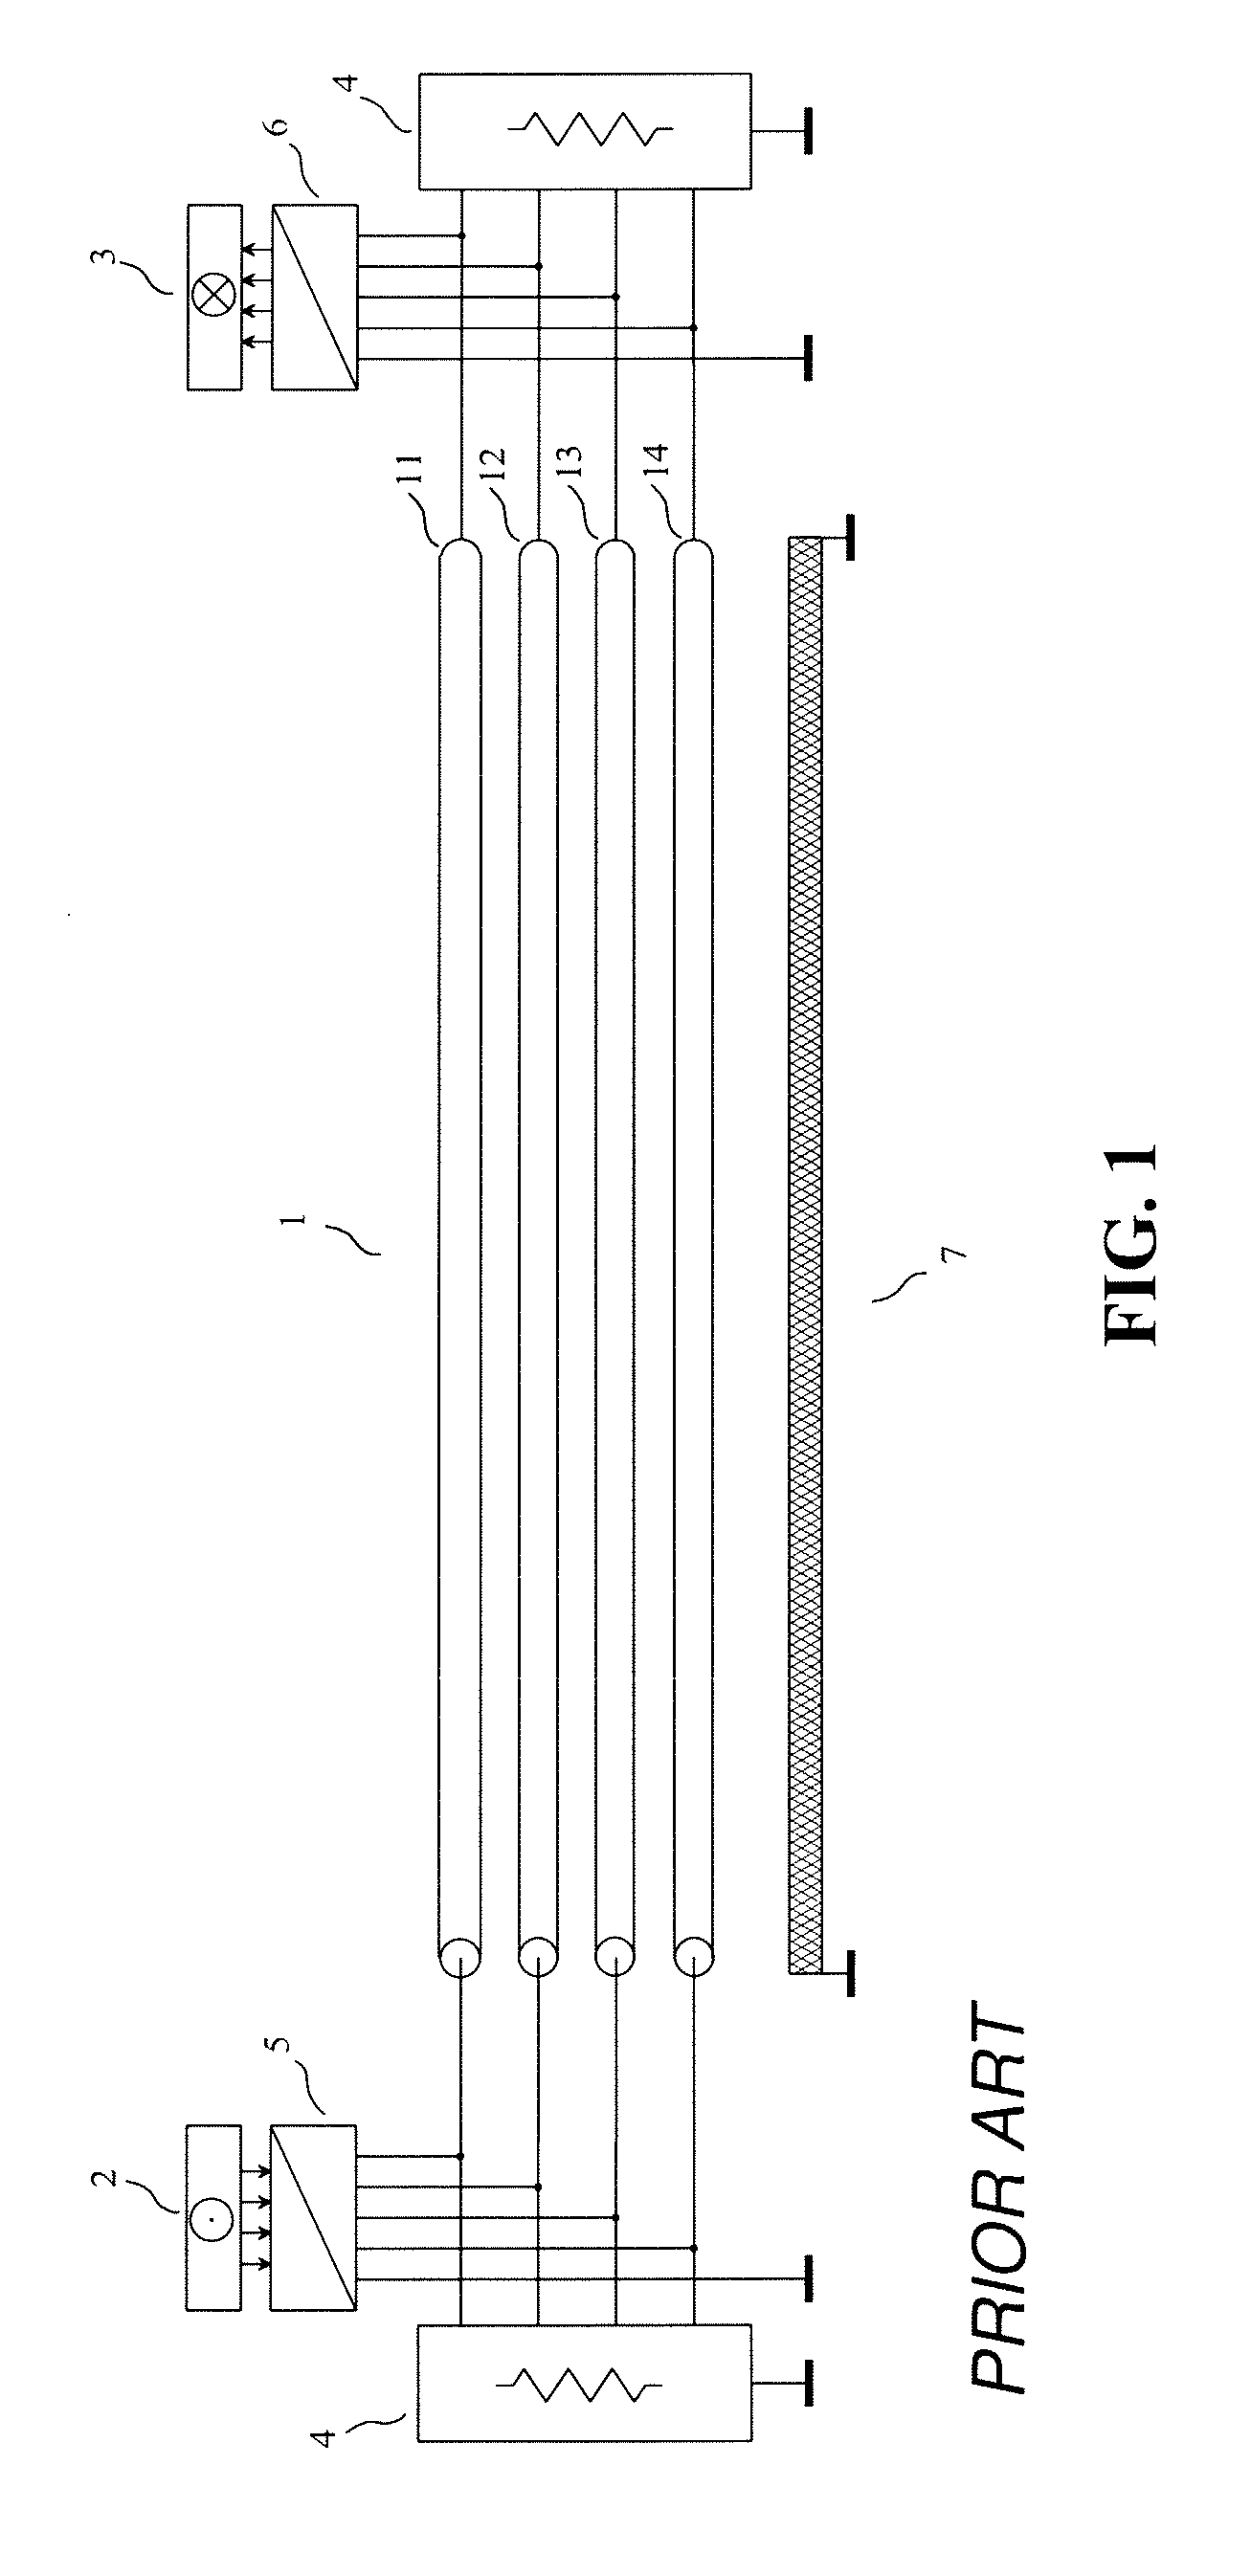 Method for pseudo-differential transmission using modal electrical variables